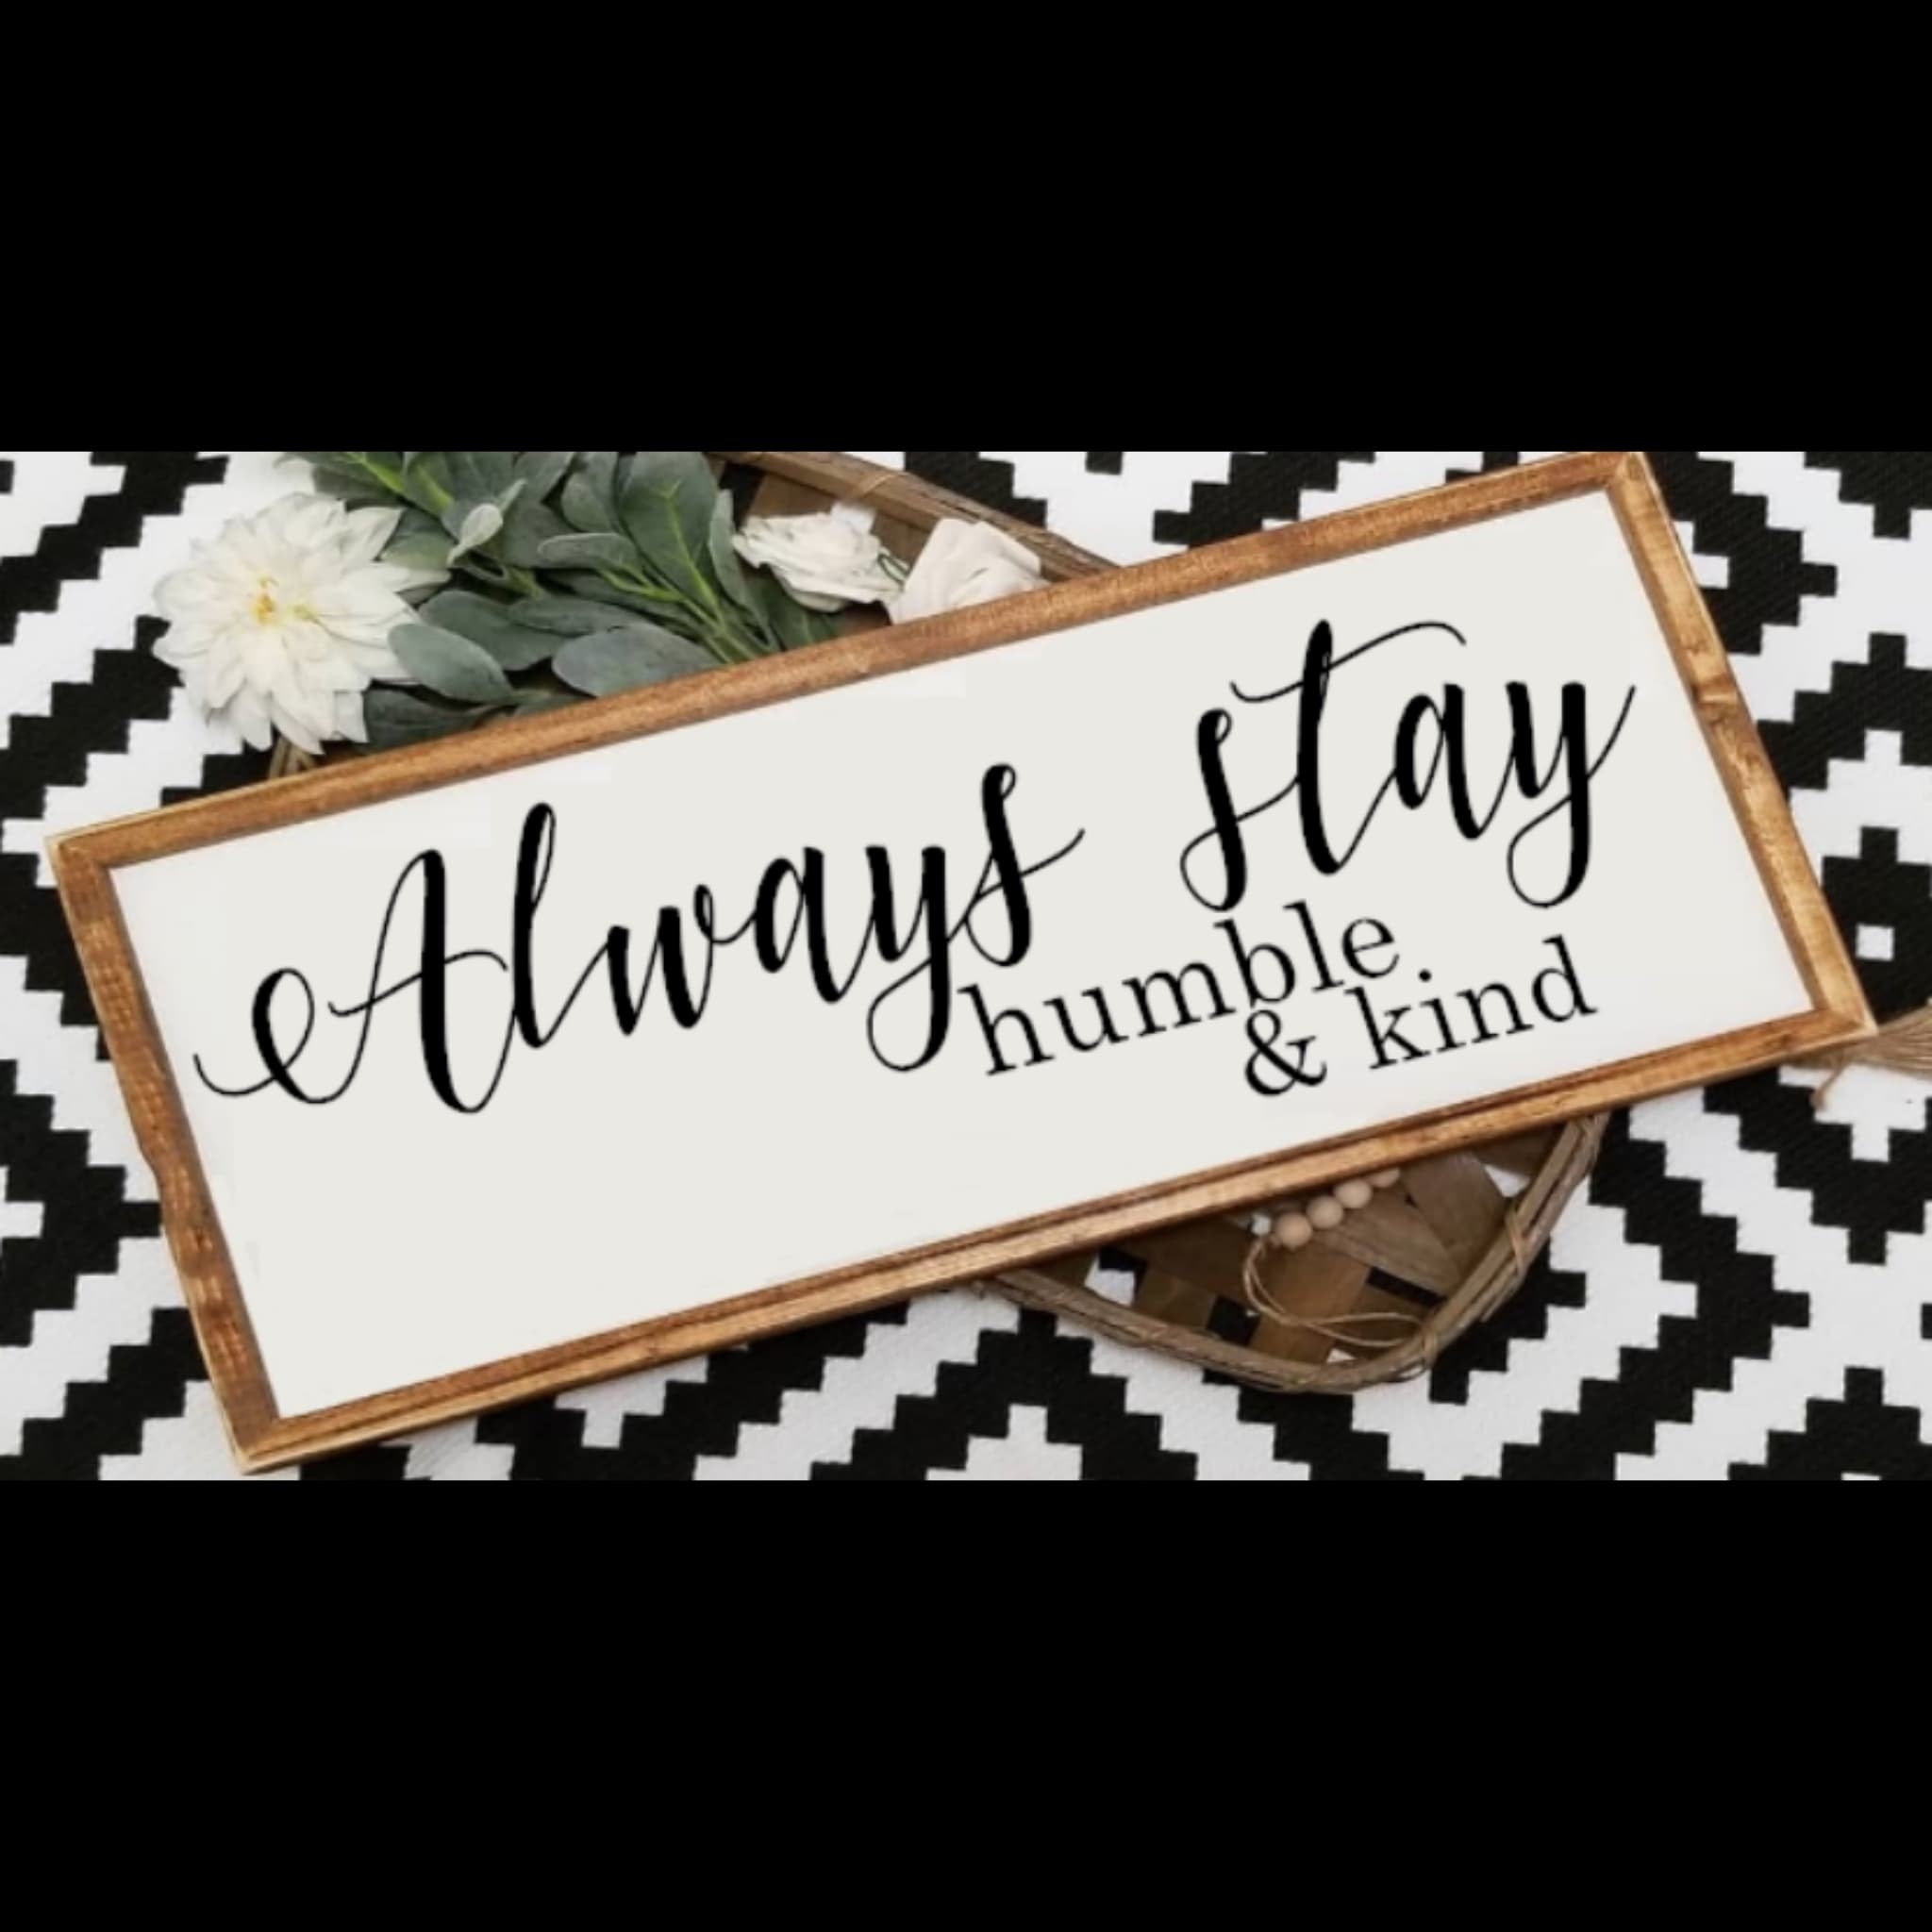 Always stay humble and kind sign